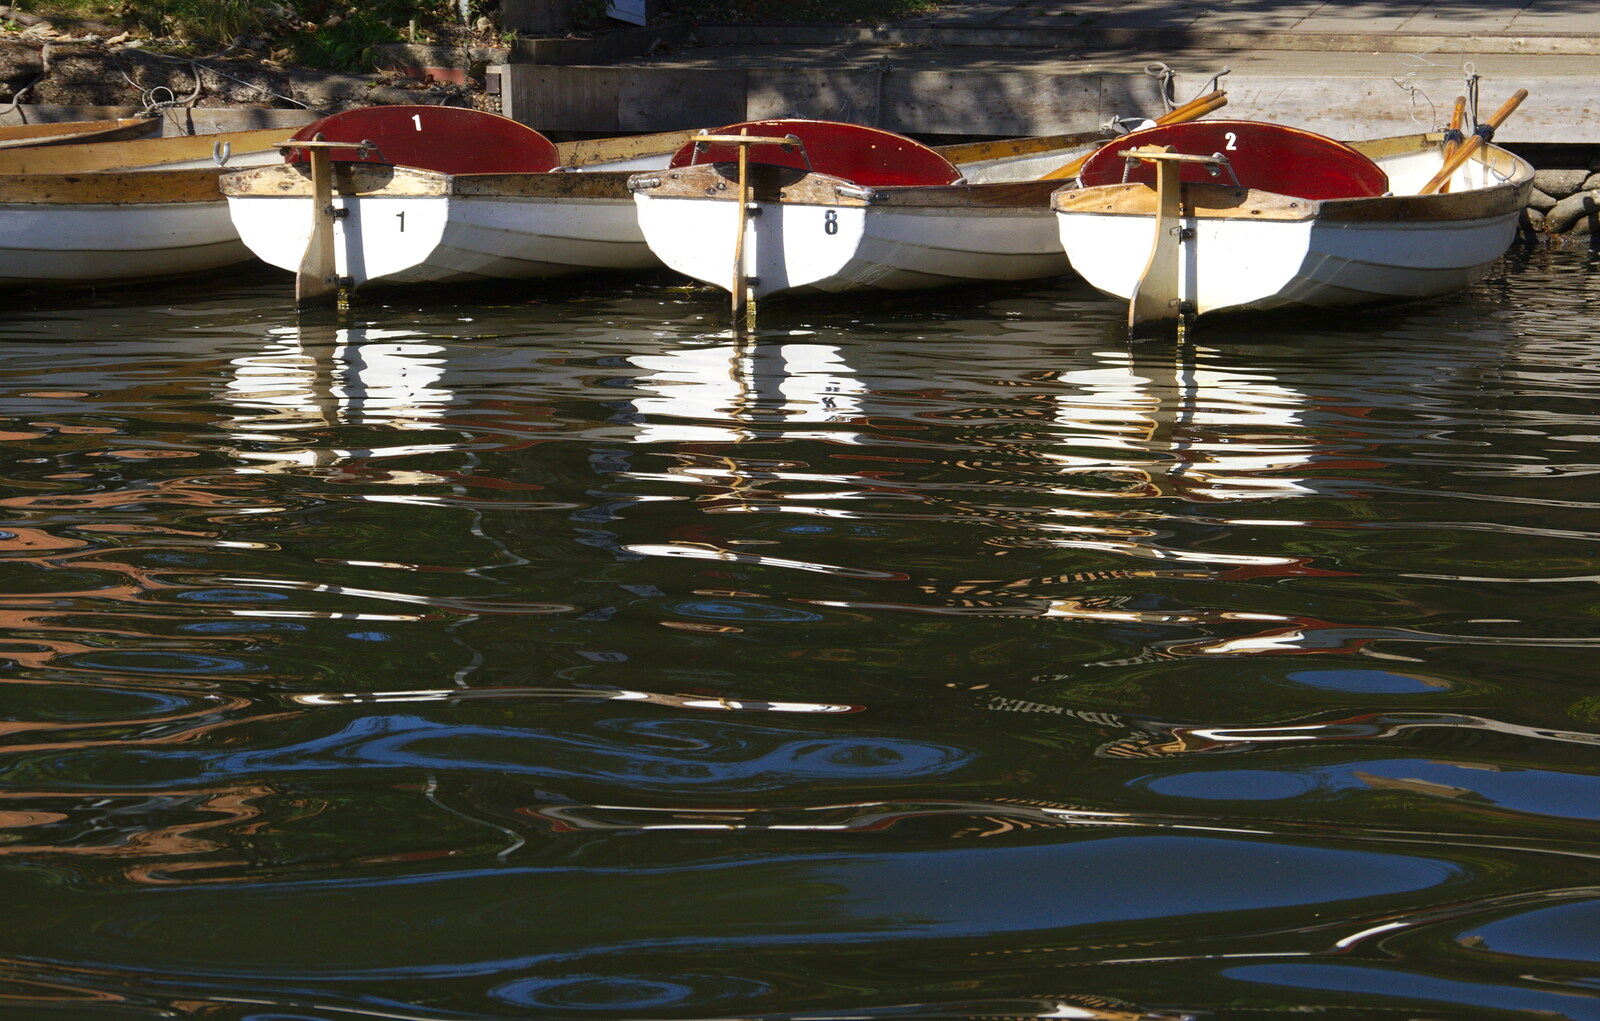 Rowing boats bob about on the Avon from A Boat Trip on the River, Stratford upon Avon, Warwickshire - 14th September 2019